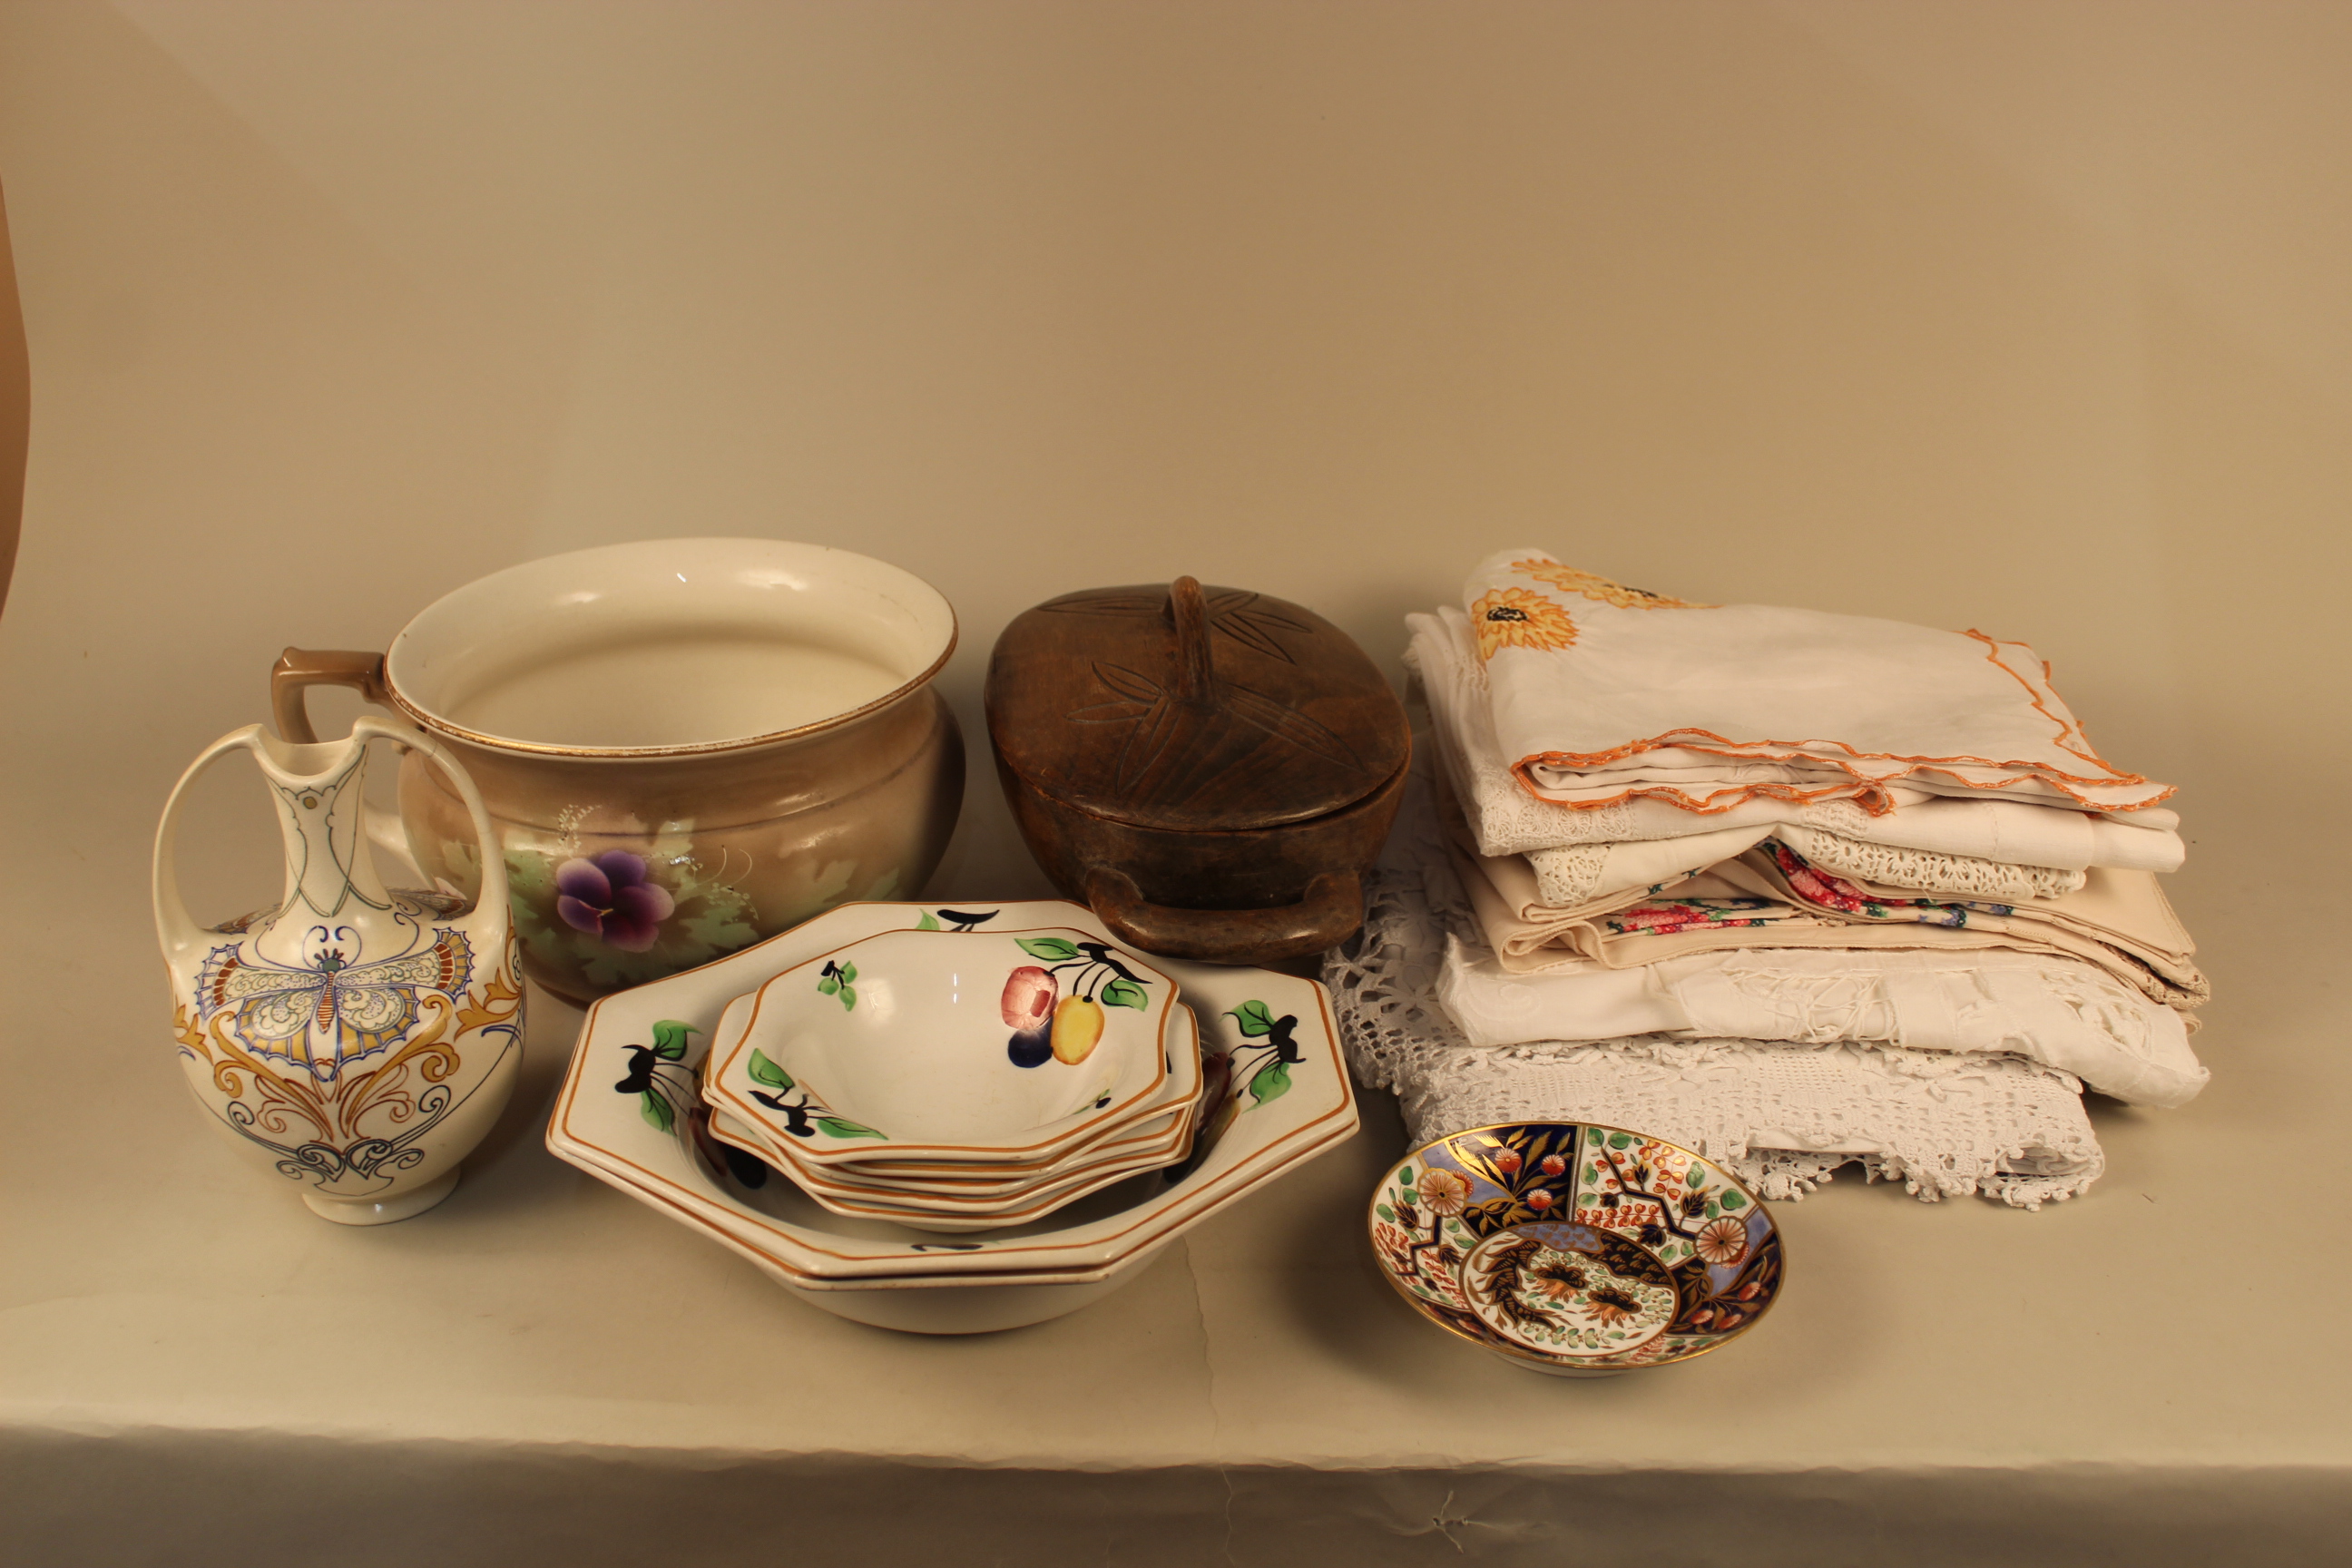 A mixed box including silver plated cutlery, lace and cotton tablecloths, - Image 2 of 3